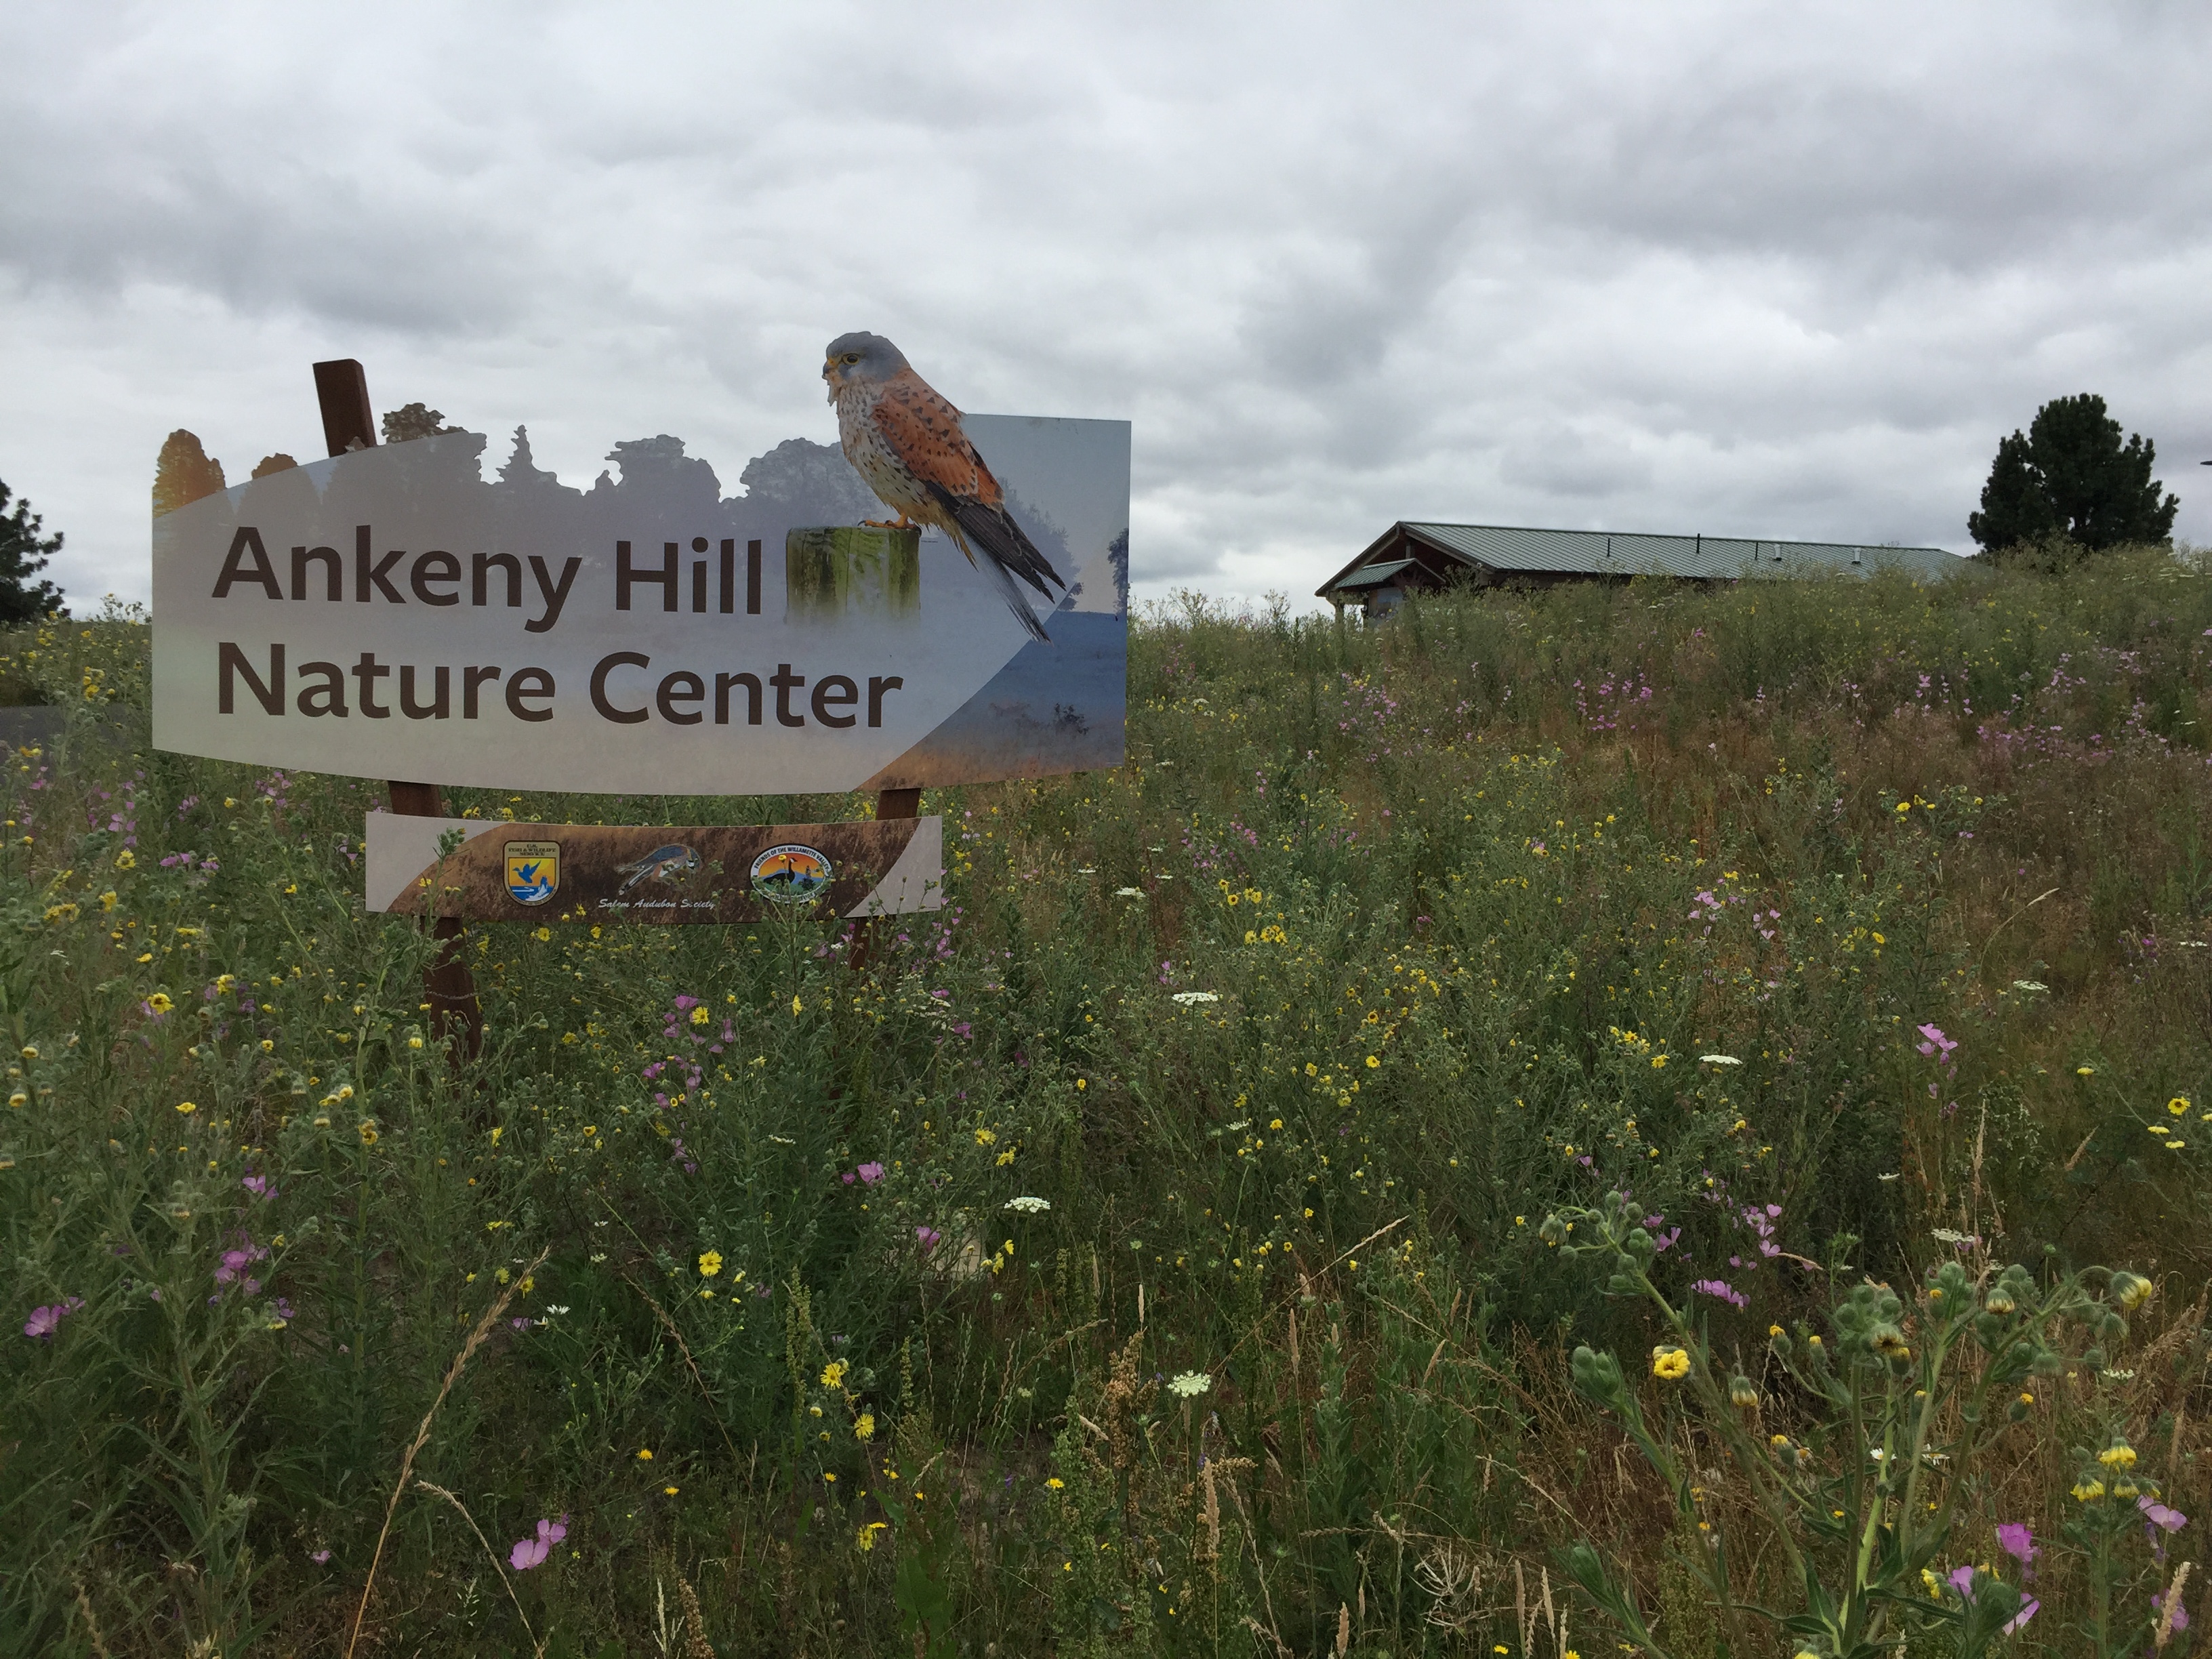 Welcome sign for the Ankeny Hill Nature Center